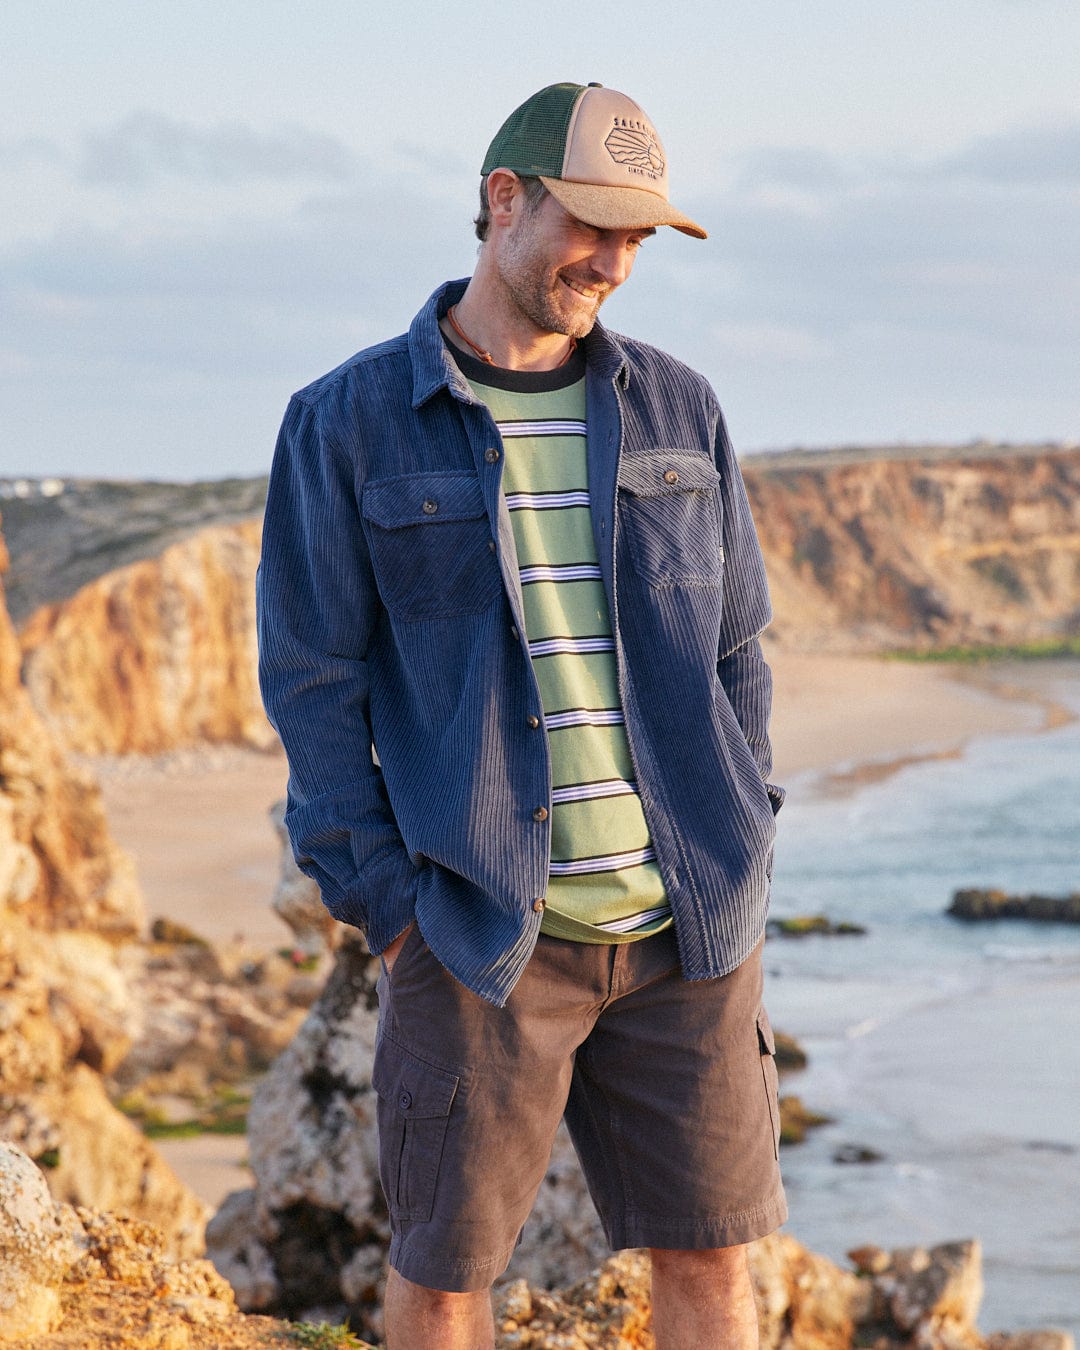 A man standing on a rocky beach wearing a Saltrock Ace - Mens Long Sleeve Shirt in Blue, hat, and shorts.